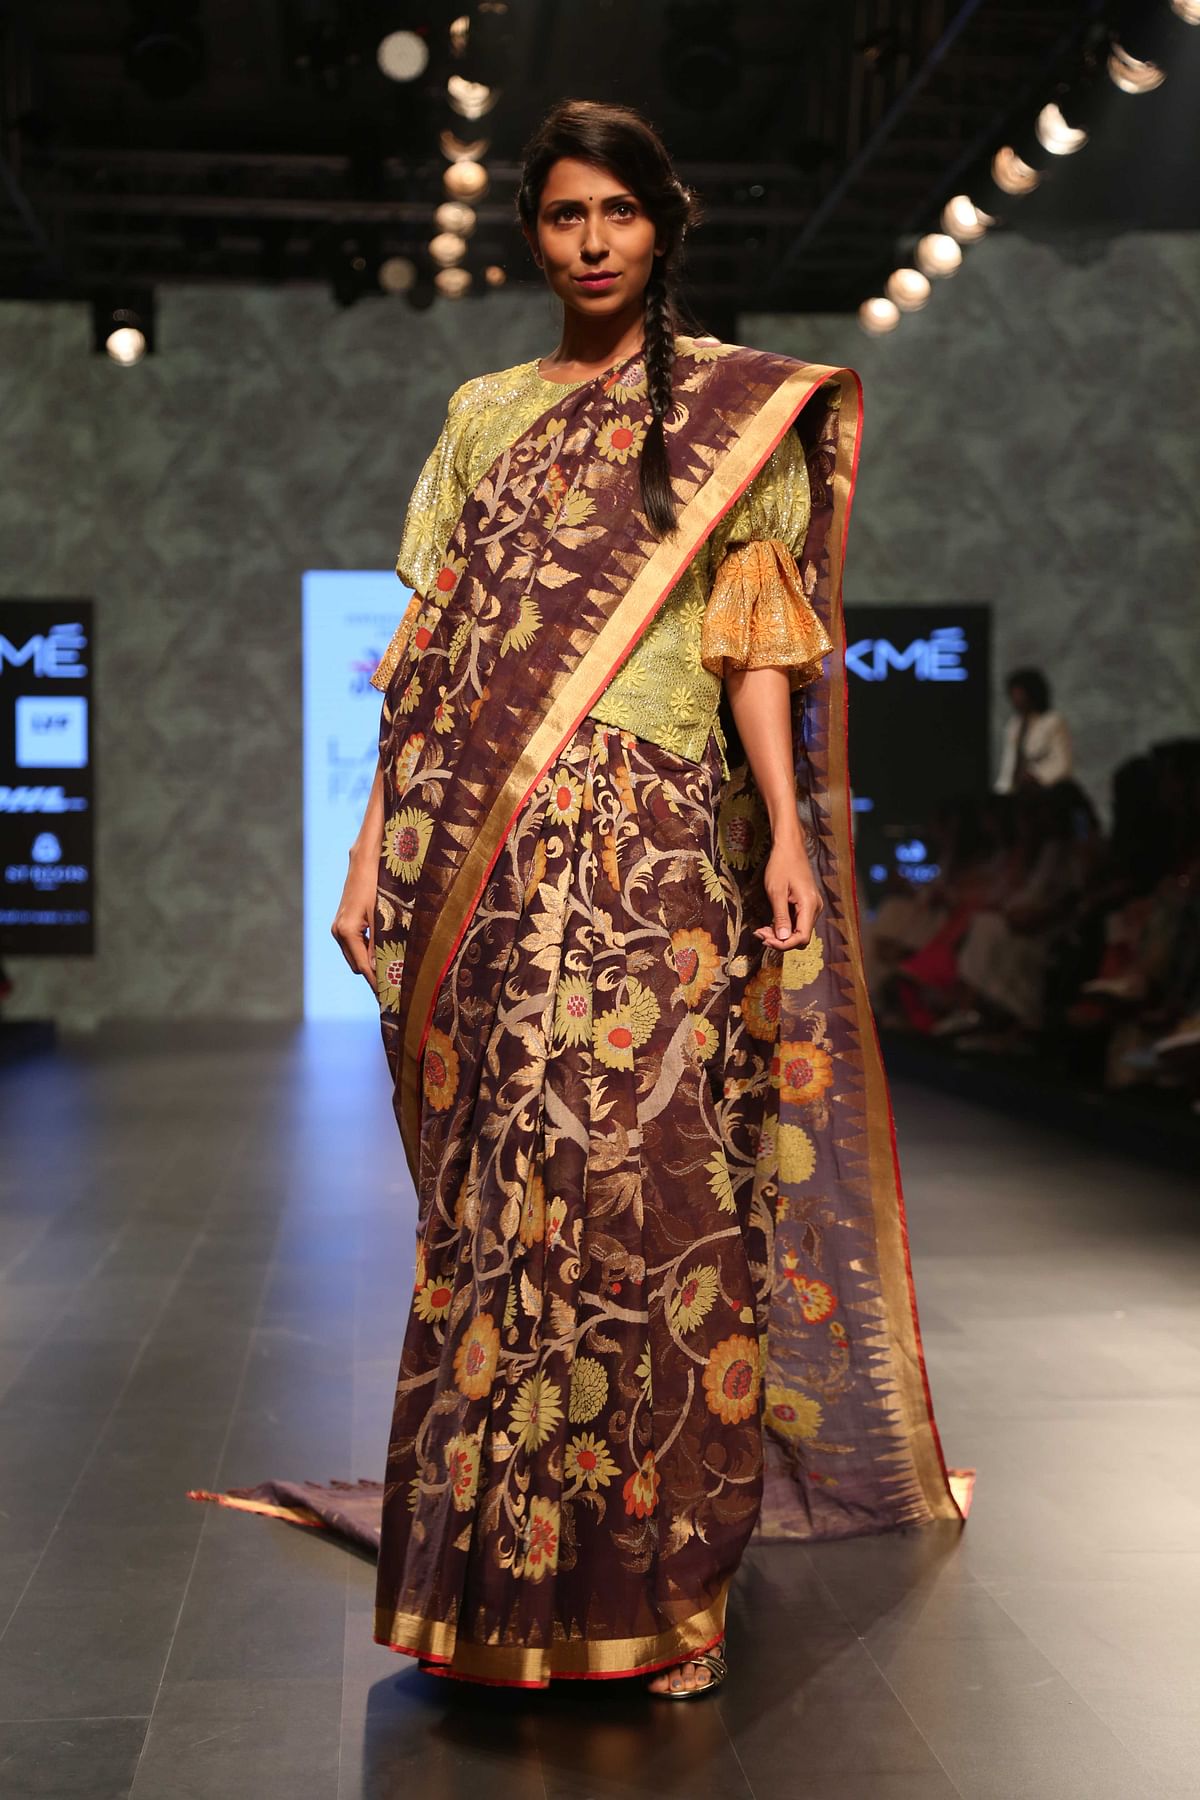 ‘Textile day’ at LFW 2016 was an eye pleaser. Experimental collections and a pregnant model broke all stereotypes!